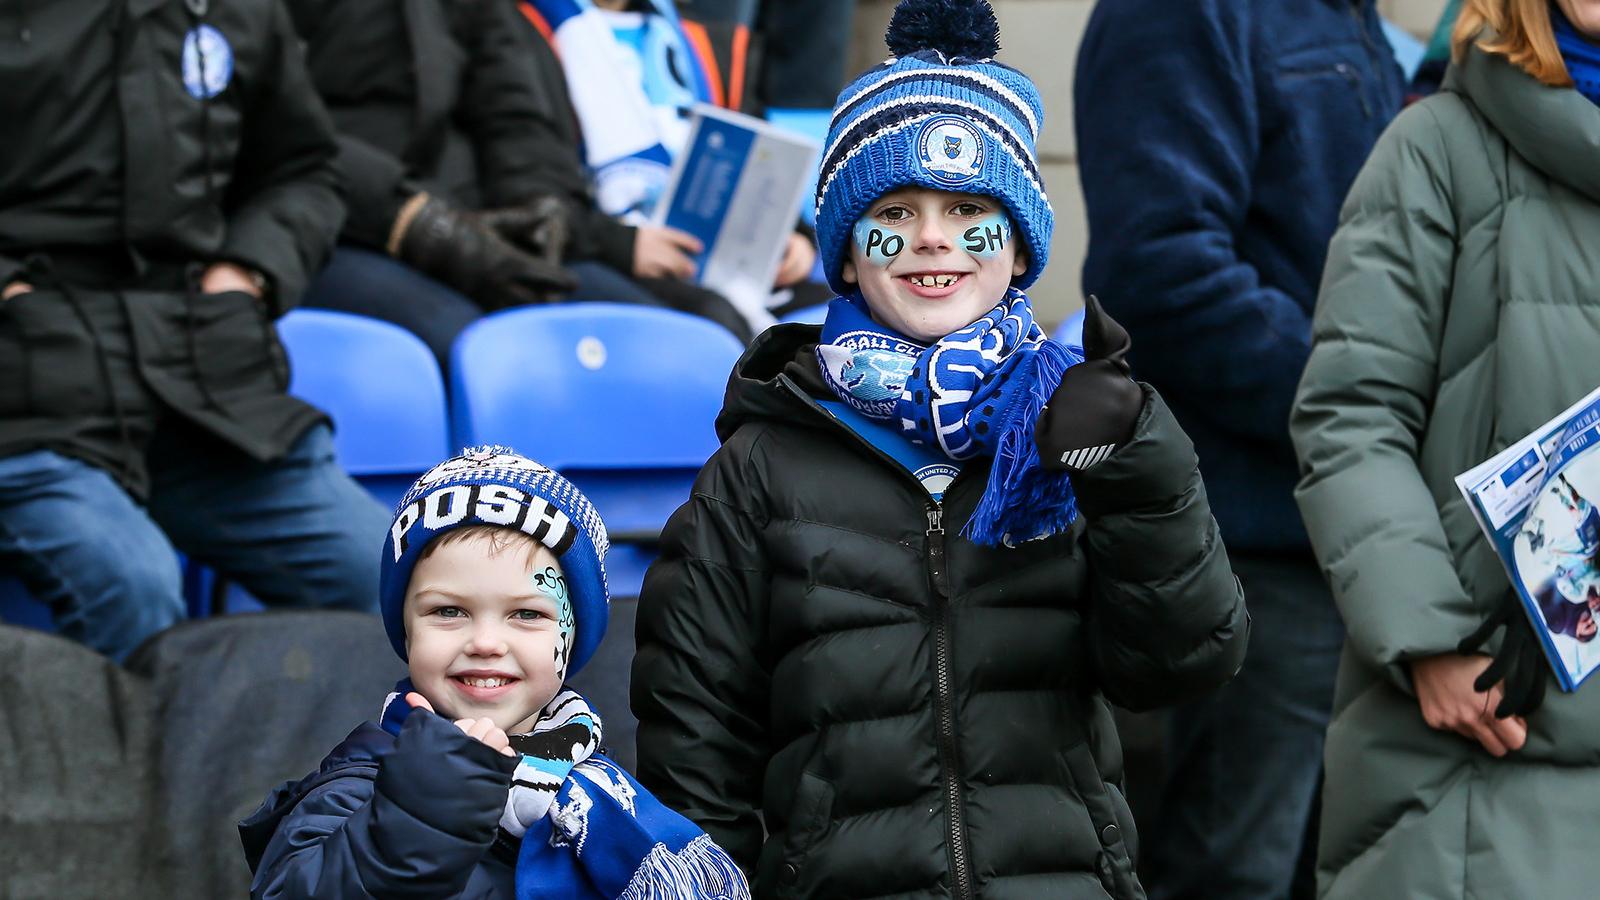 Young Posh fans at a match